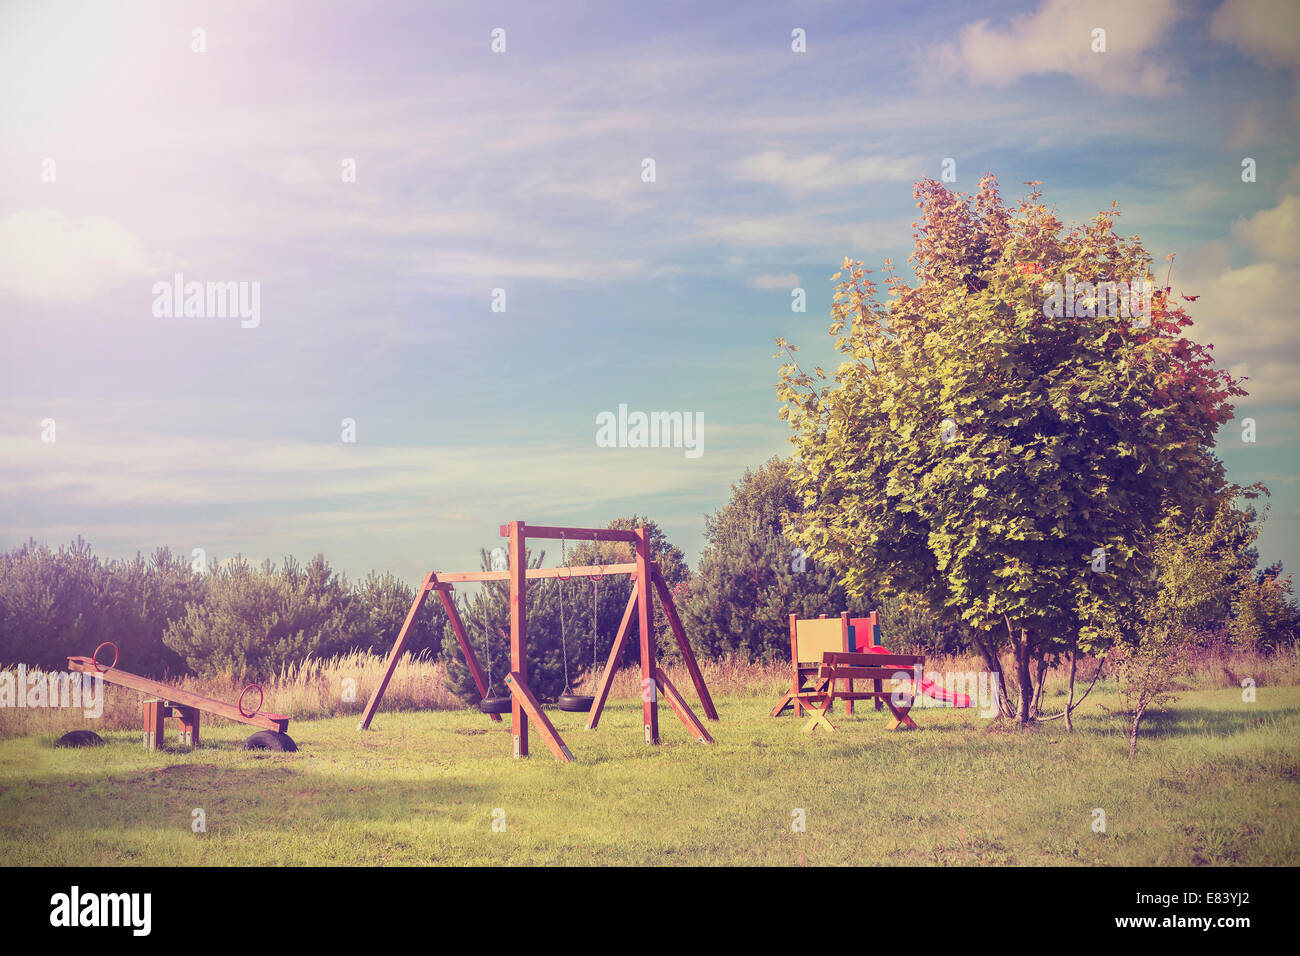 Retro vintage style picture of playground in park. Stock Photo